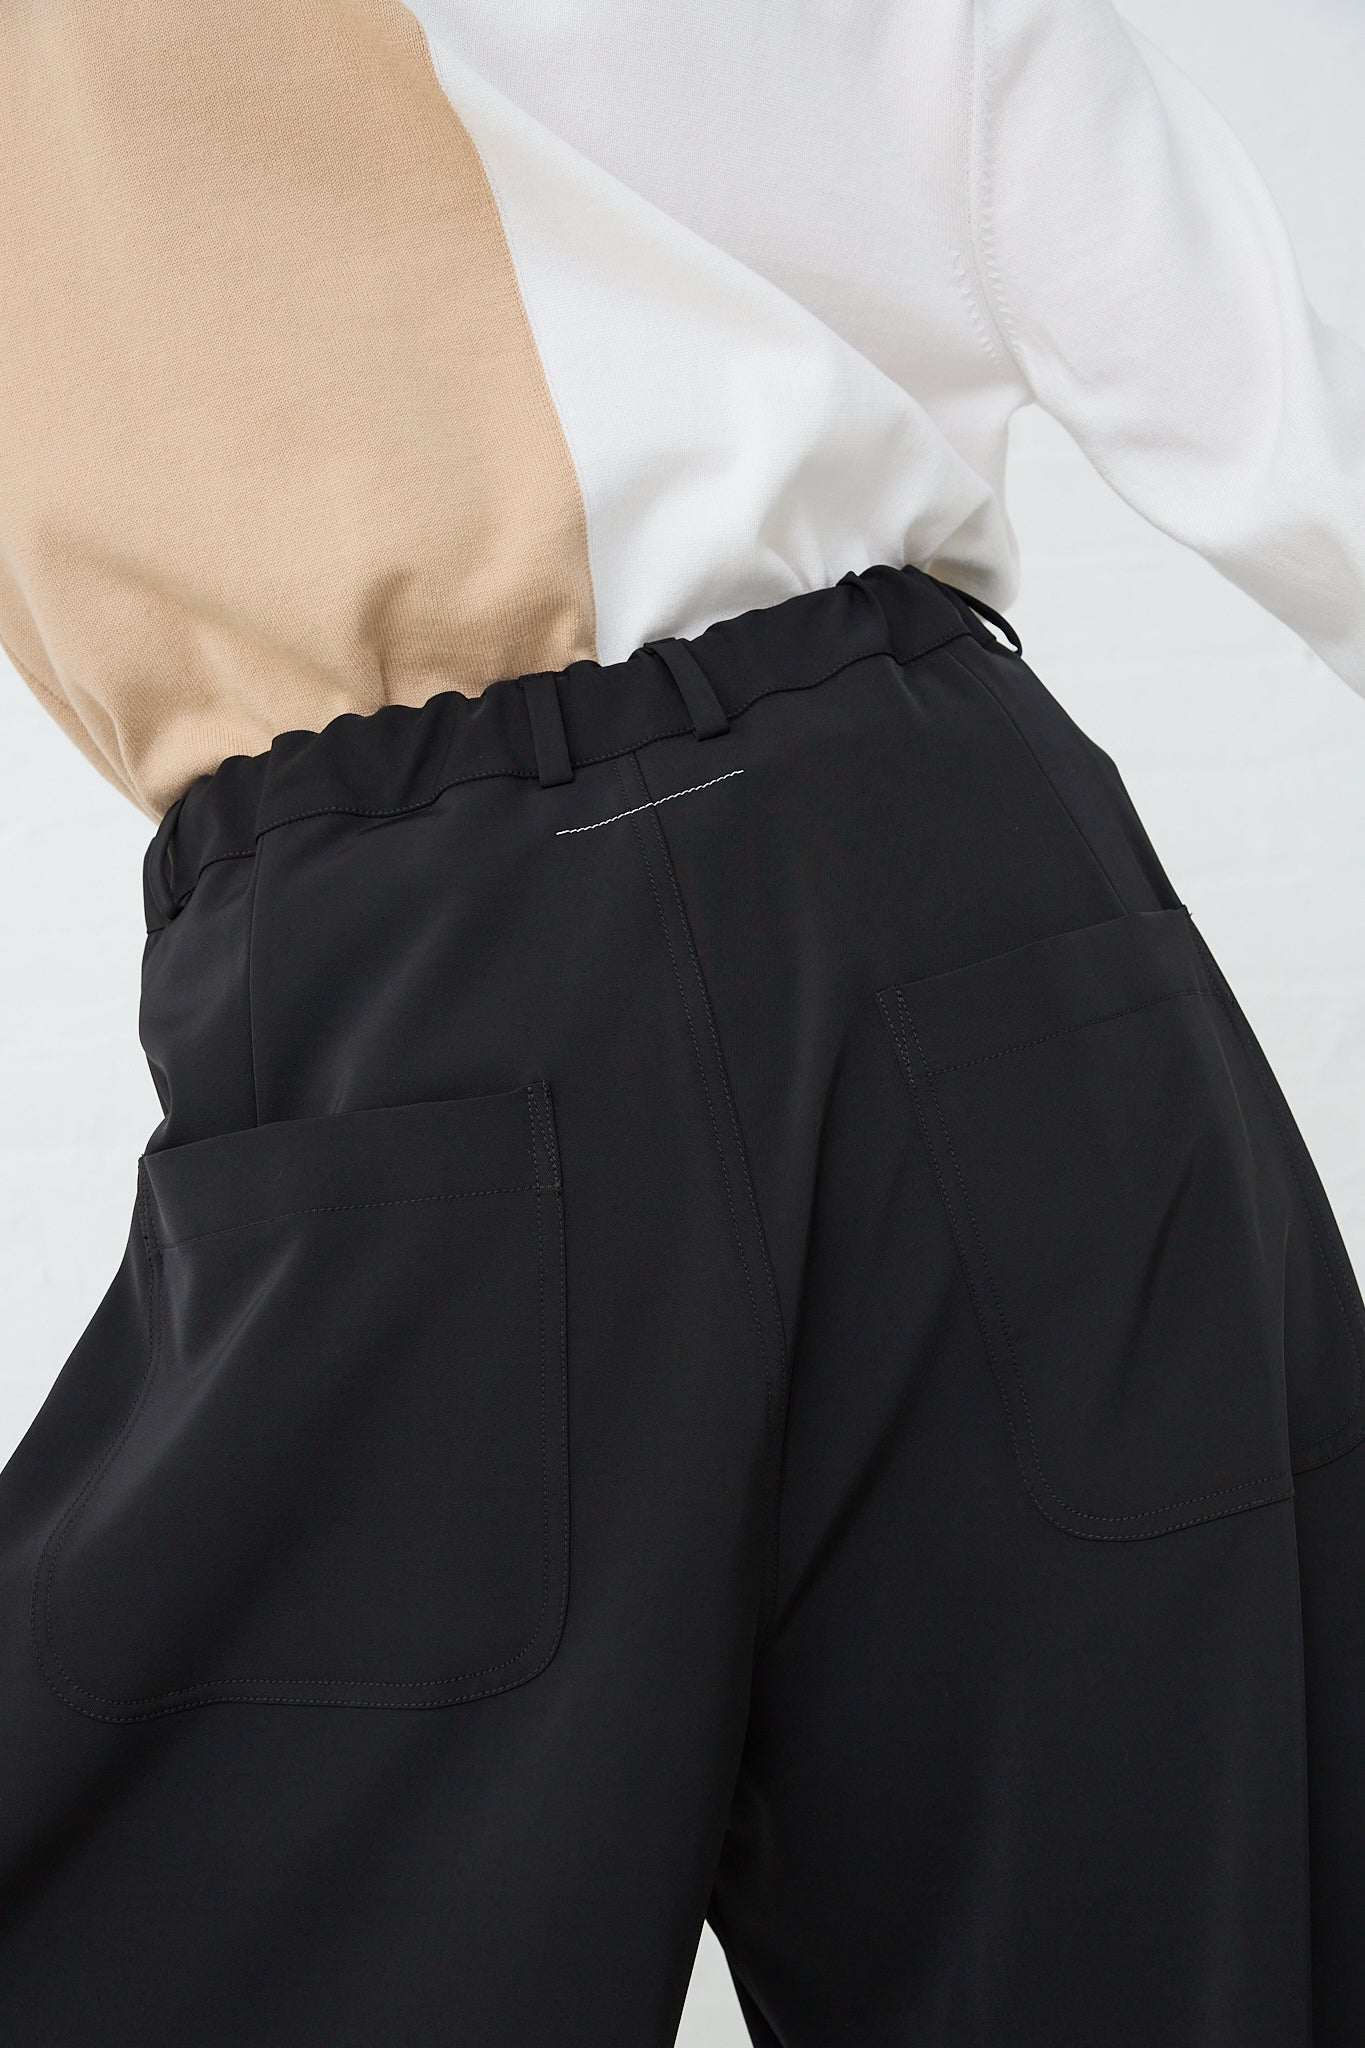 A model wearing MM6's Pant in Black. Back view and up close of pockets.